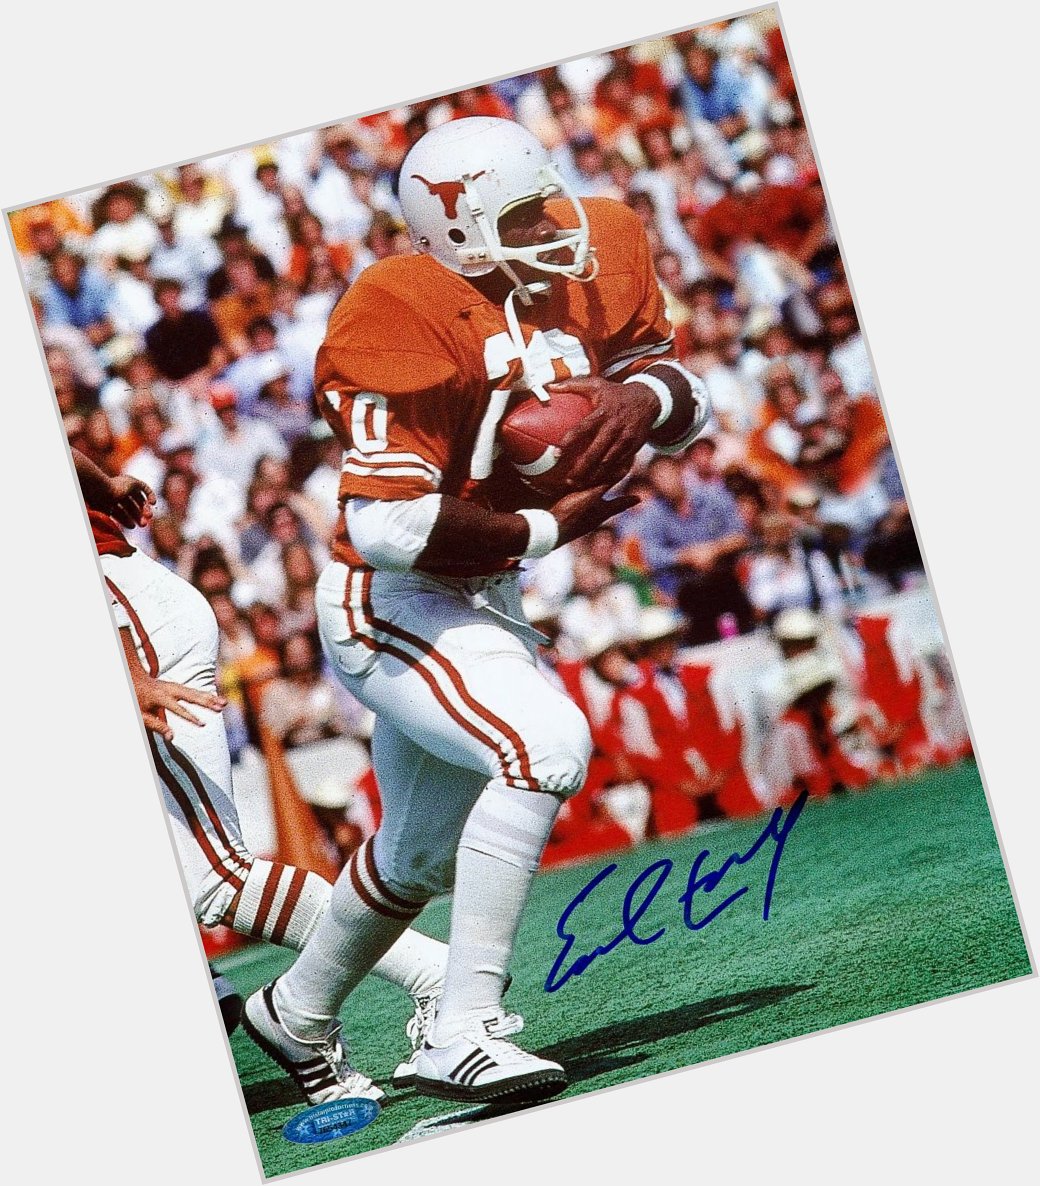 Happy Birthday to Earl Campbell! 